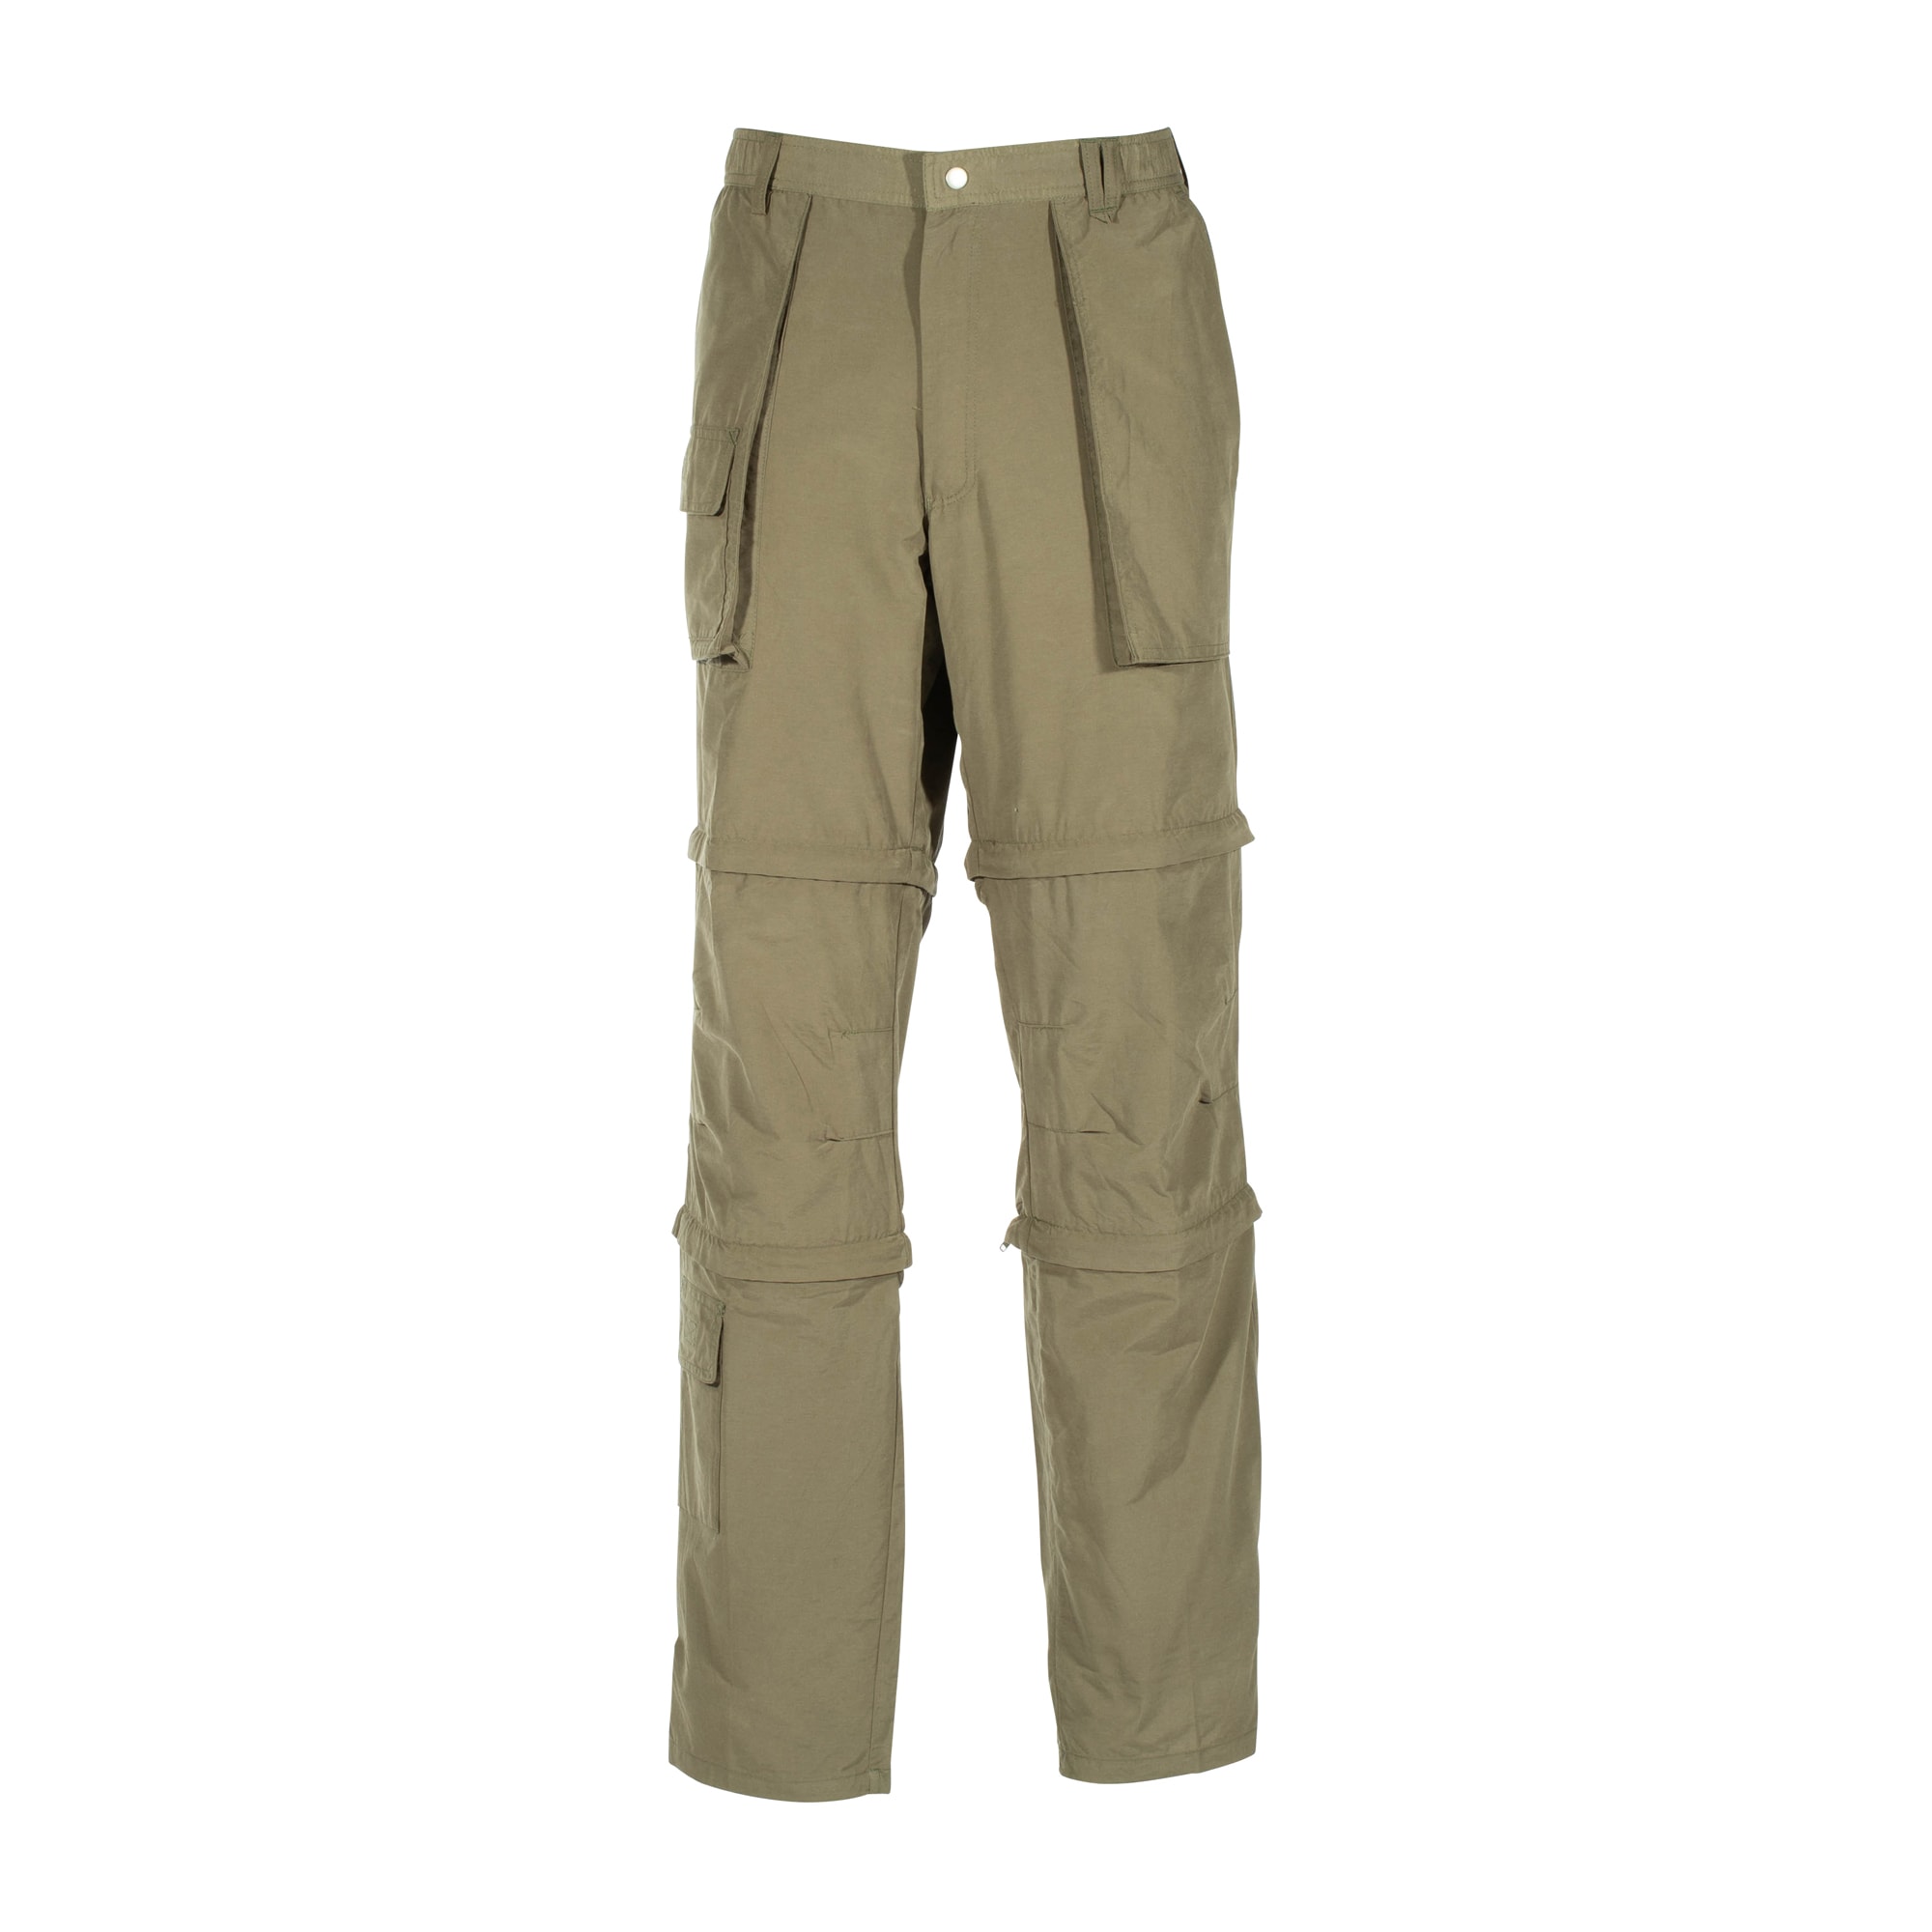 Purchase the Outdoor Pants olive green by ASMC